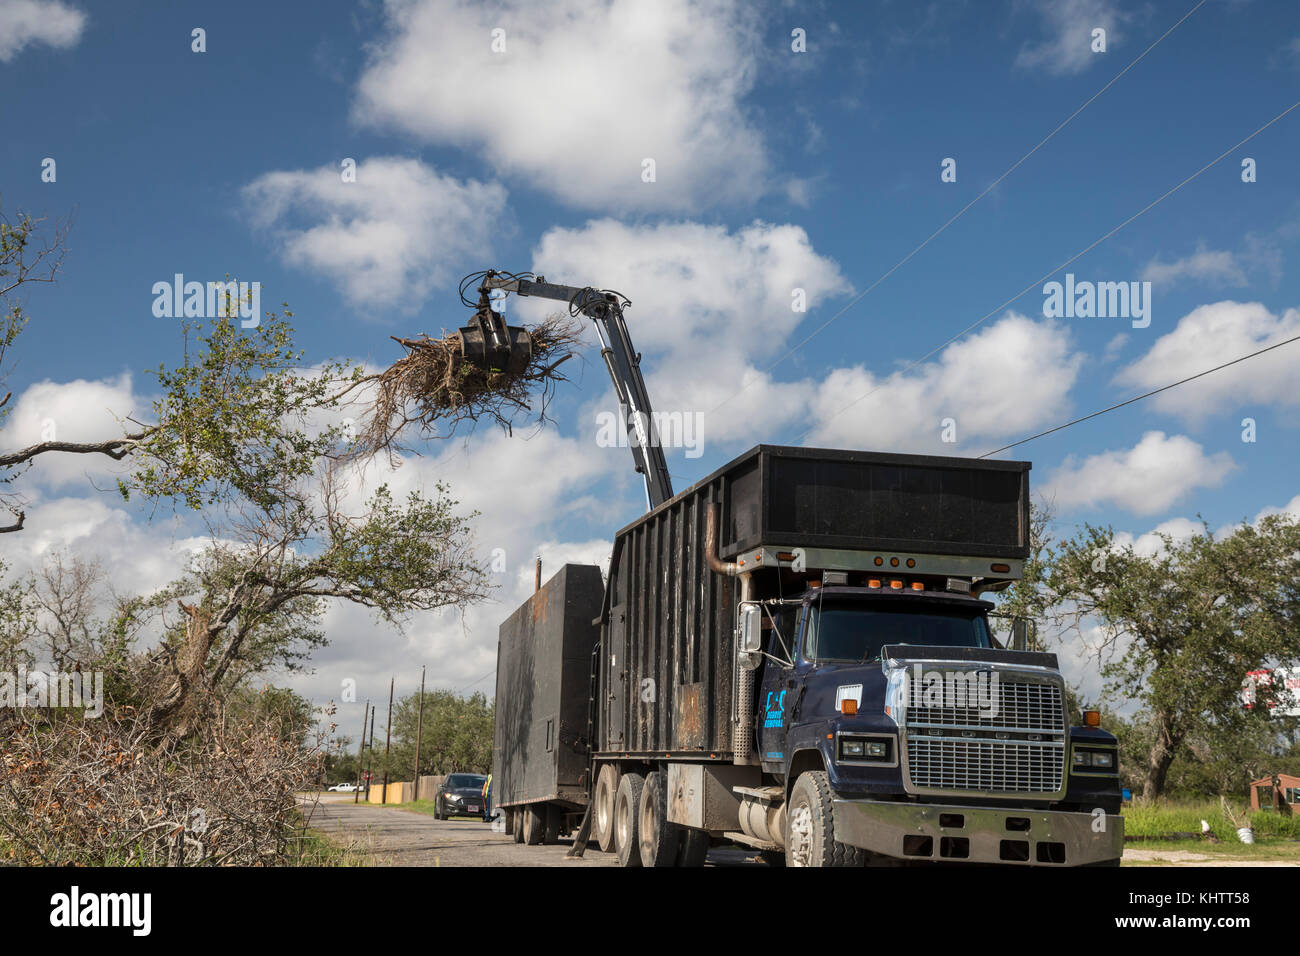 Rockport, Texas - A truck picks up debris from Hurricane Harvey, 10 weeks after the storm his south Texas. Stock Photo